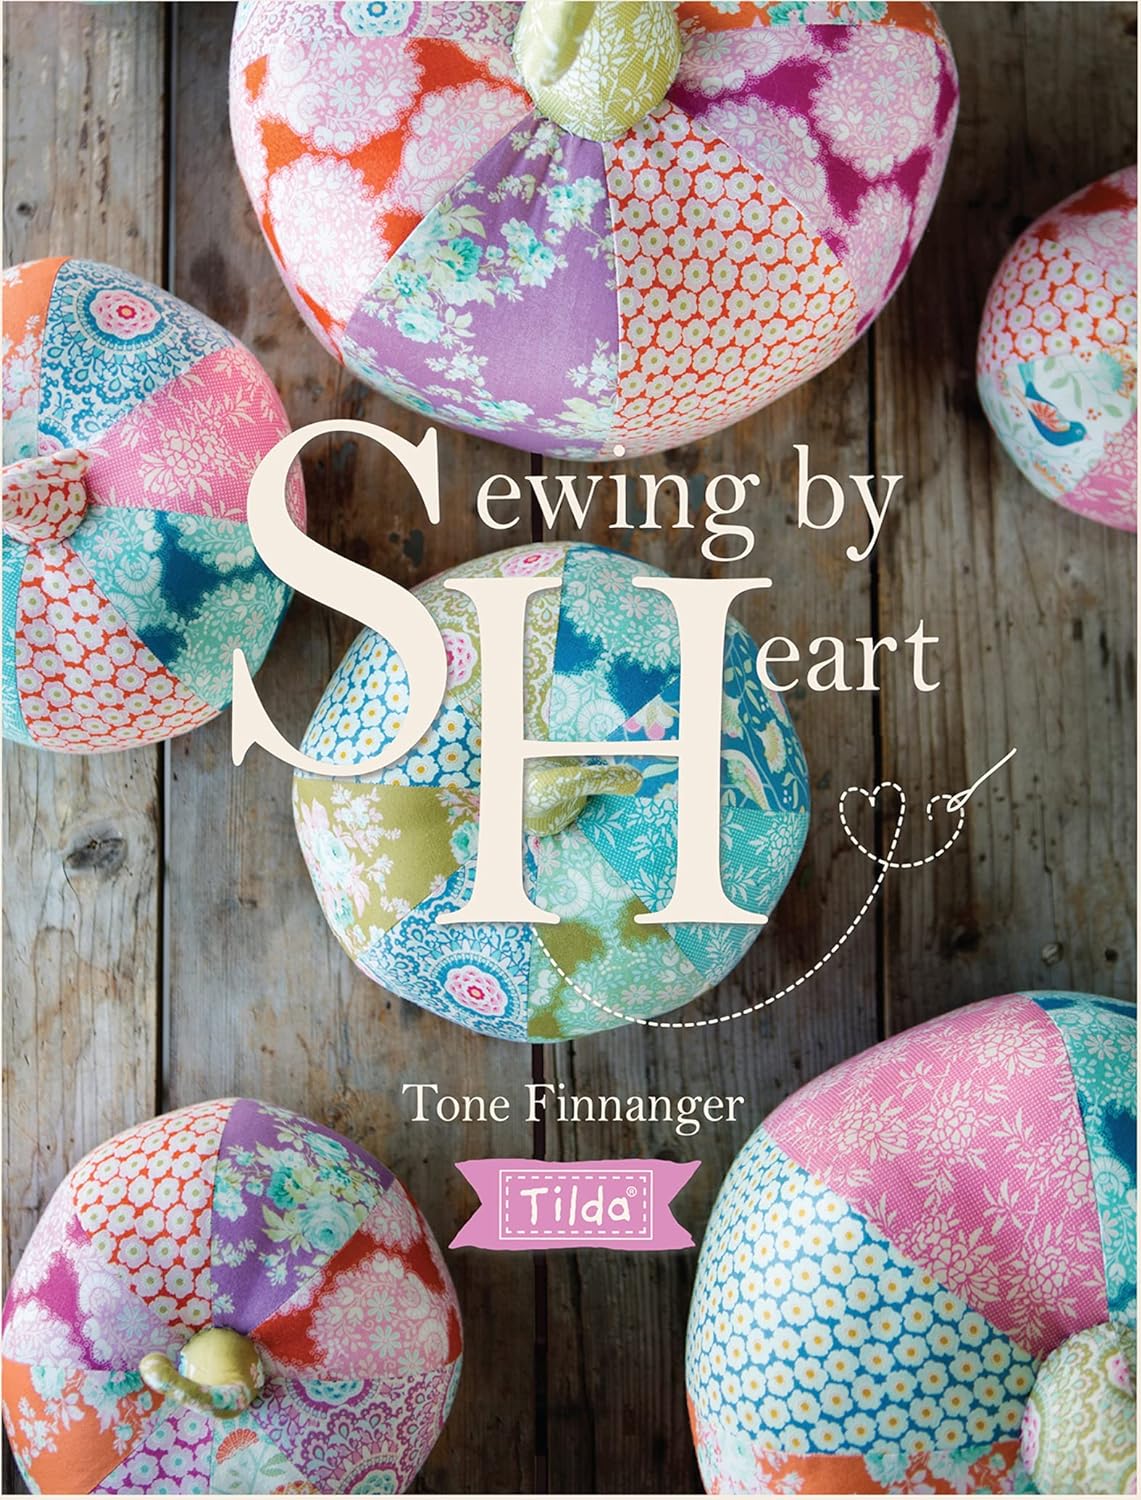 Finnanger Tone Tilda Sewing by Heart: For the Love of Fabrics 